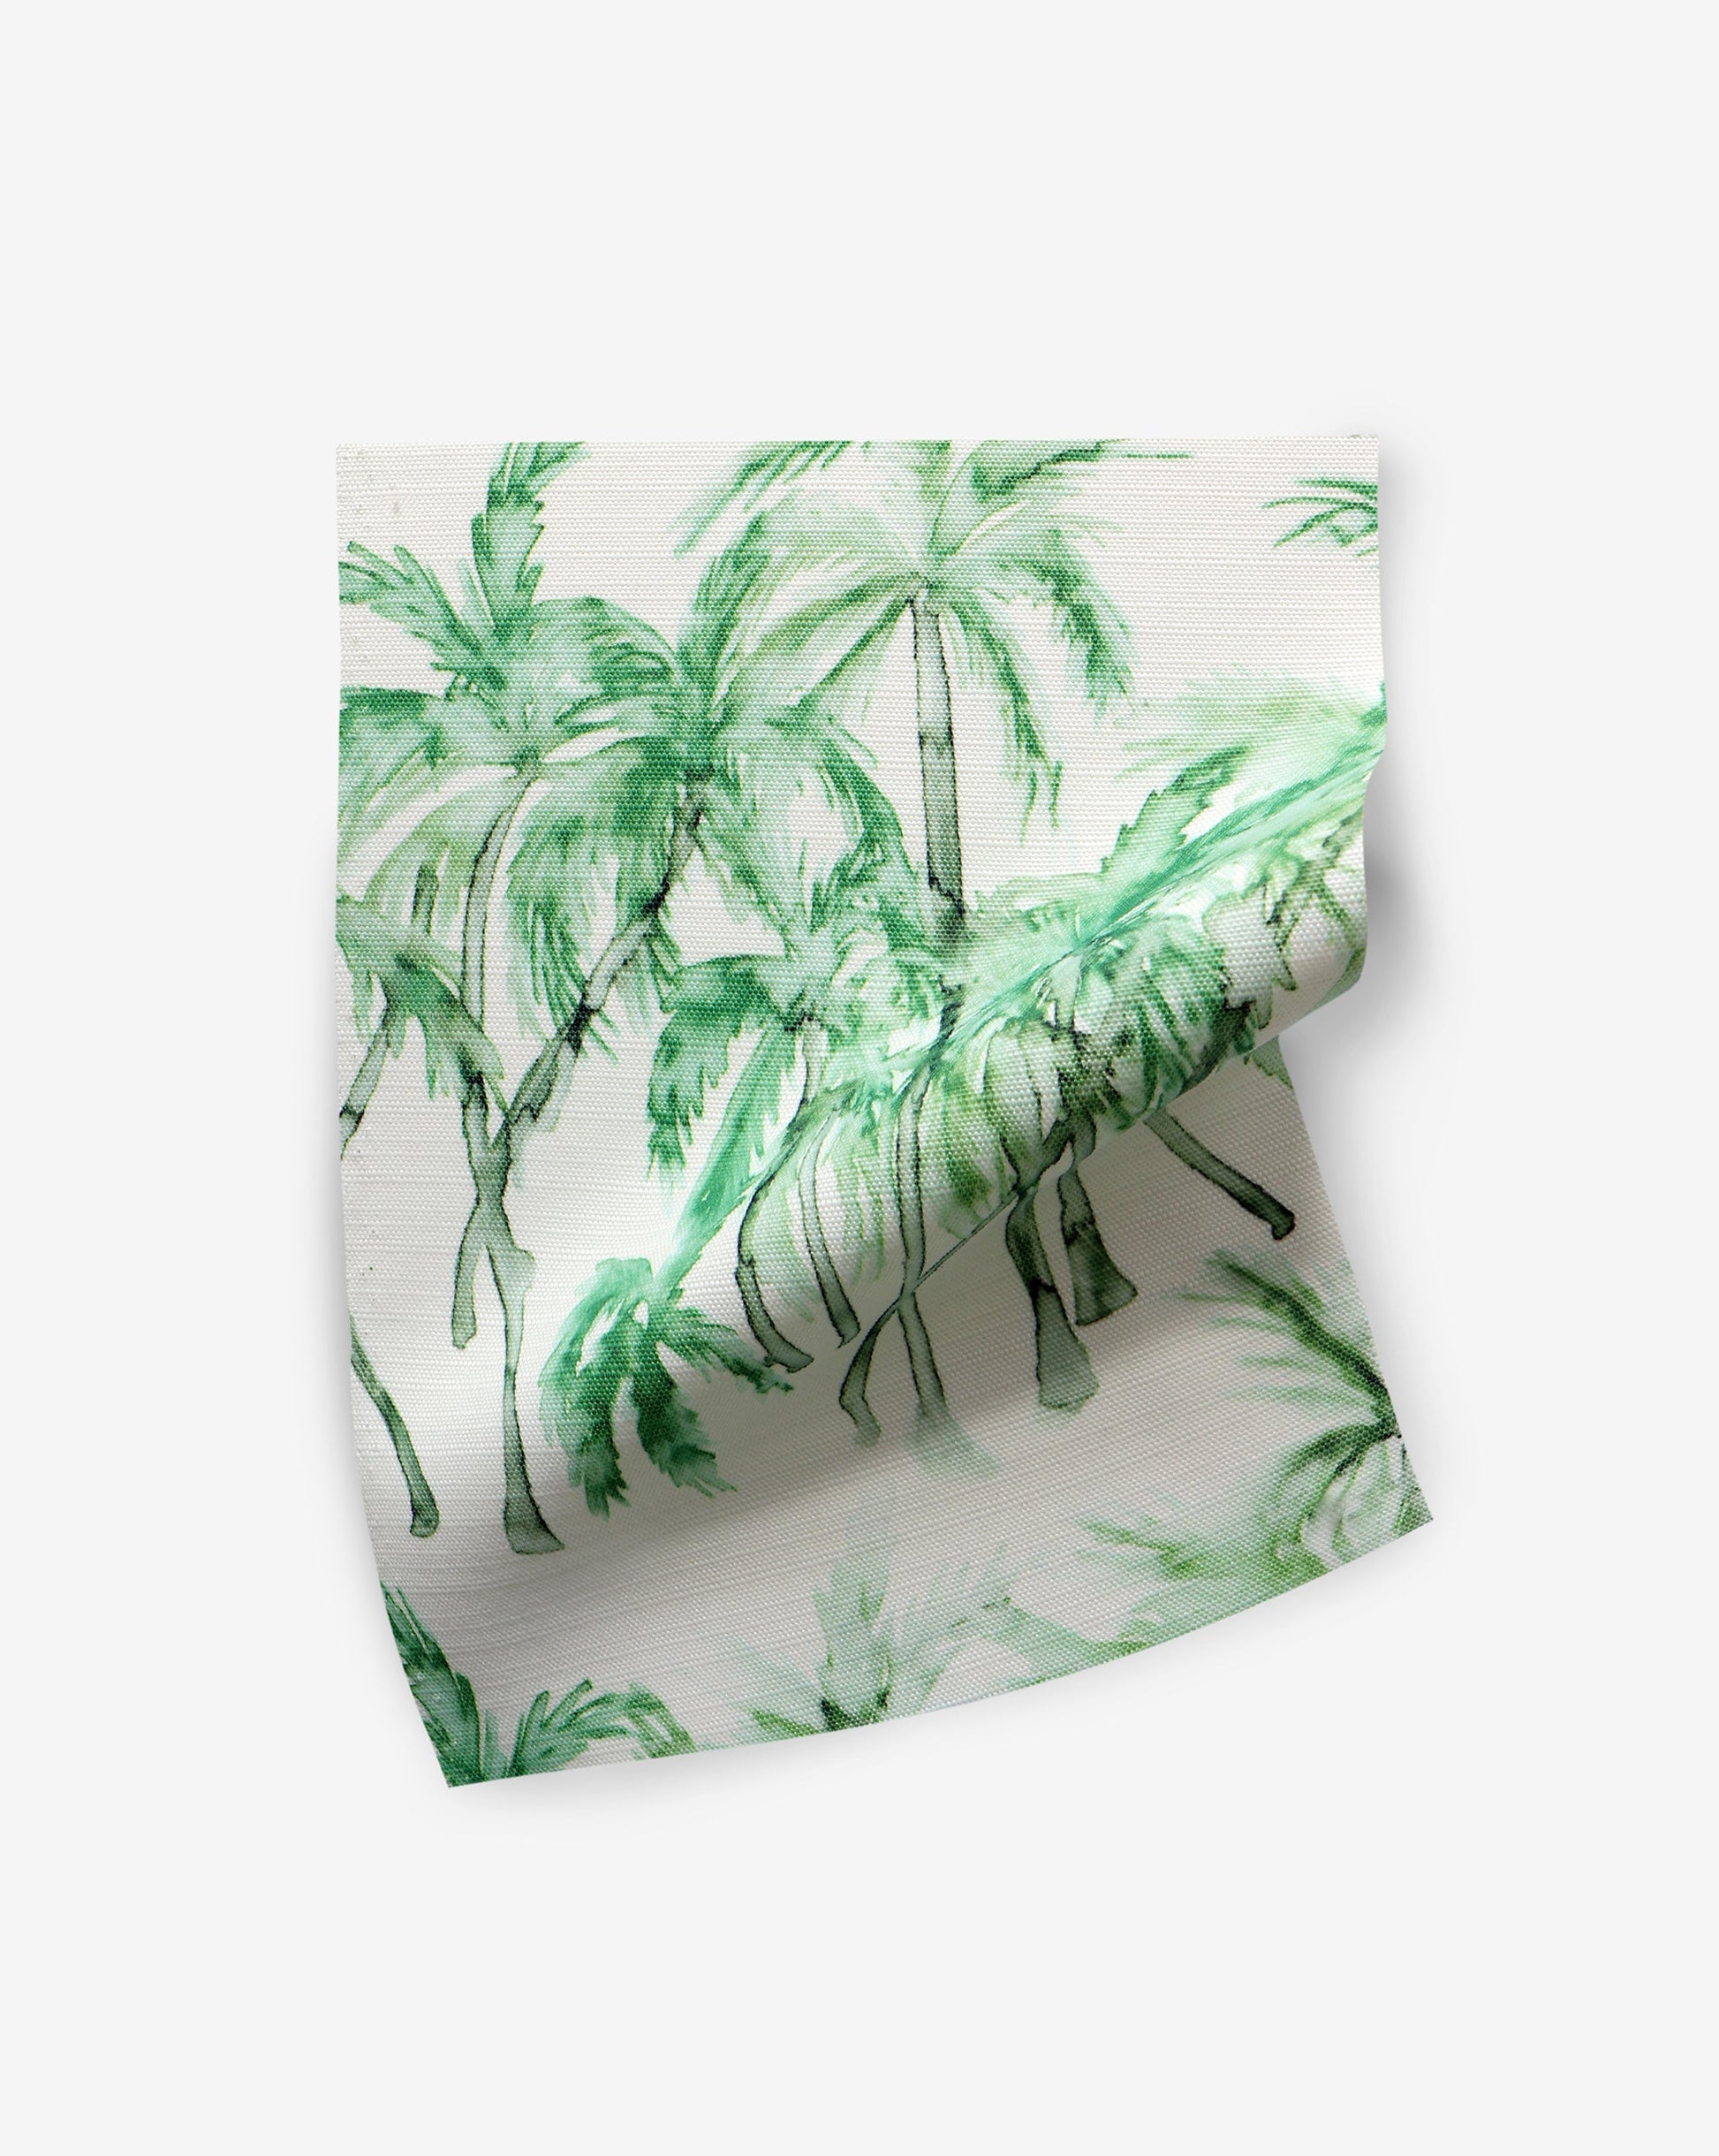 A green and white Palm Dance Performance Fabric Chloros with palm trees on it